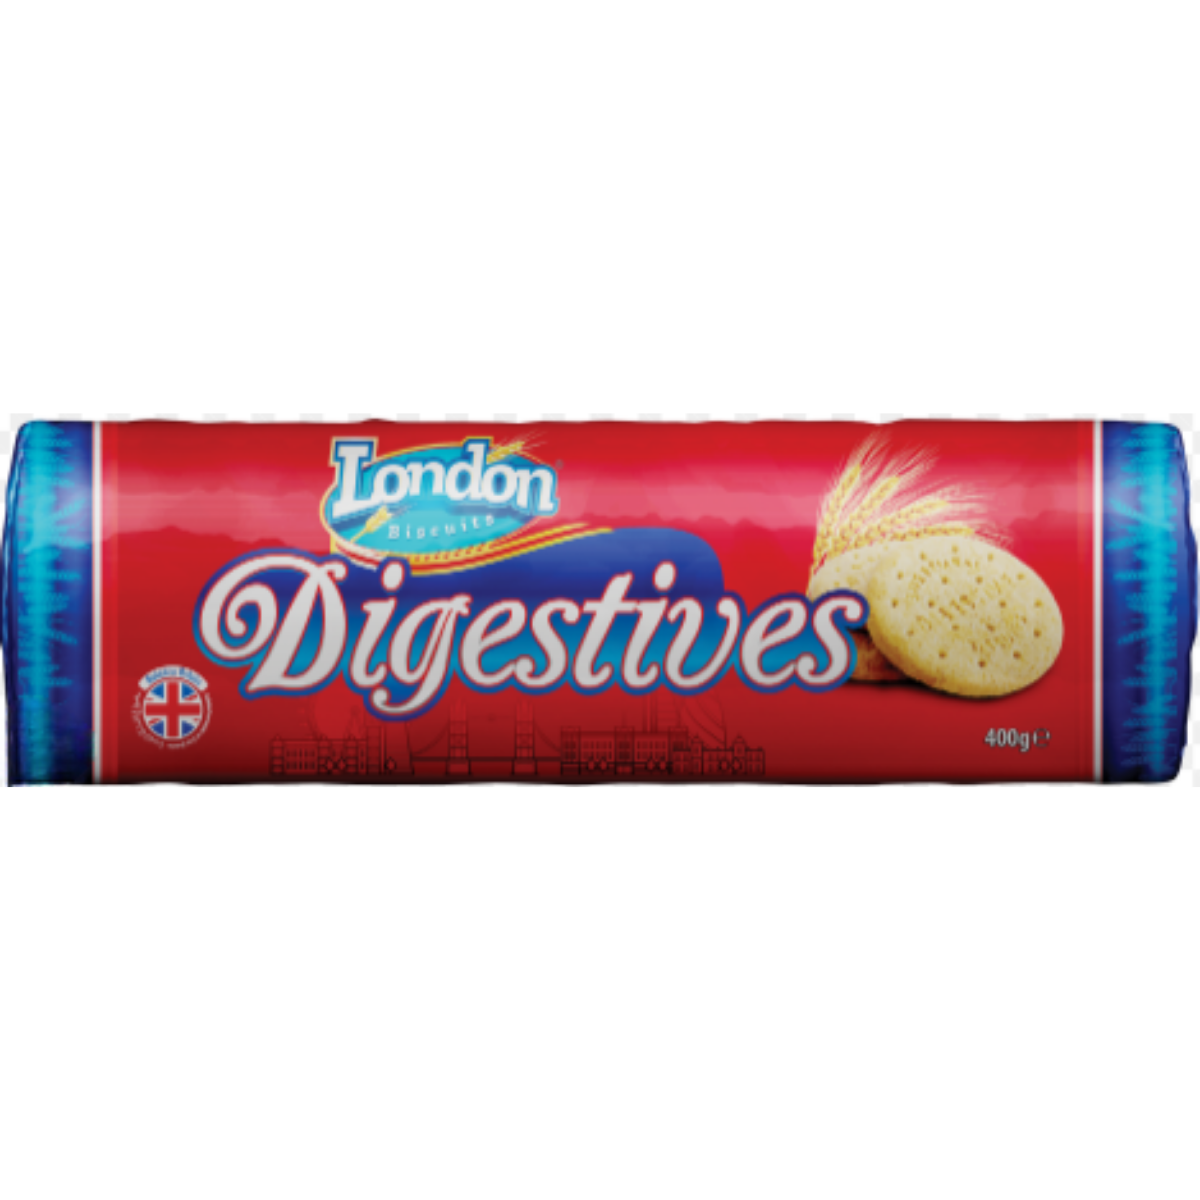 LONDON DIGESTIVES BISCUITS 400 G